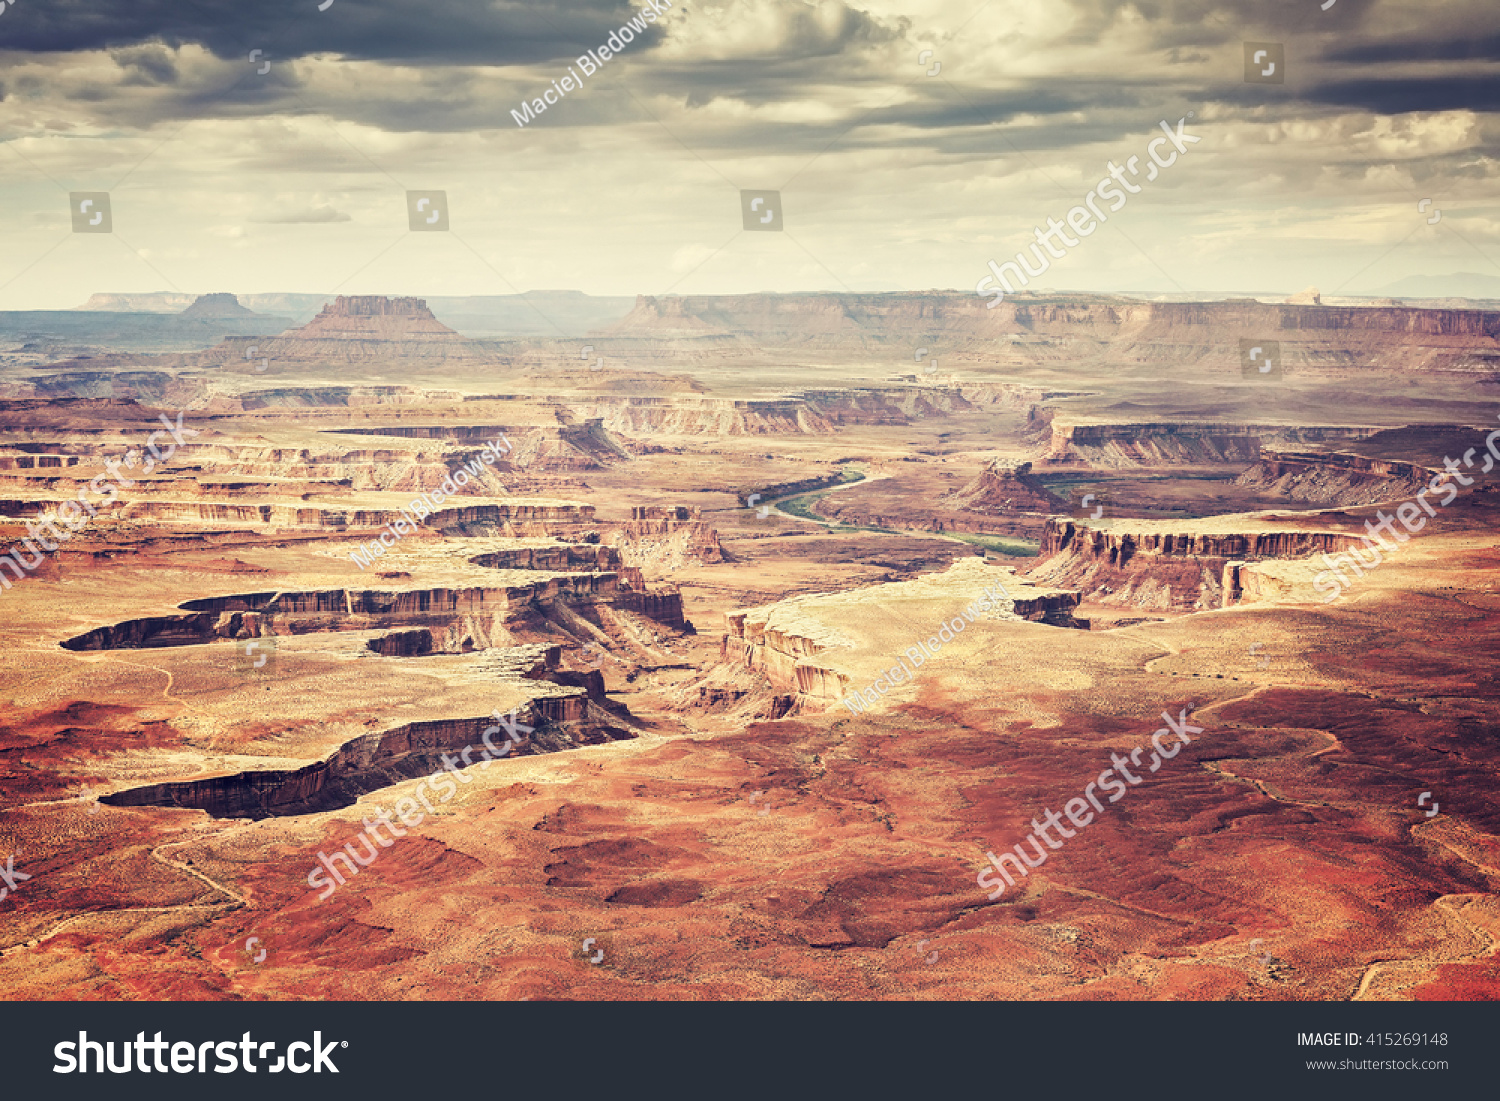 Old film stylized deserted landscape in Canyonlands National Park, Island in the Sky region, Utah, USA. #415269148